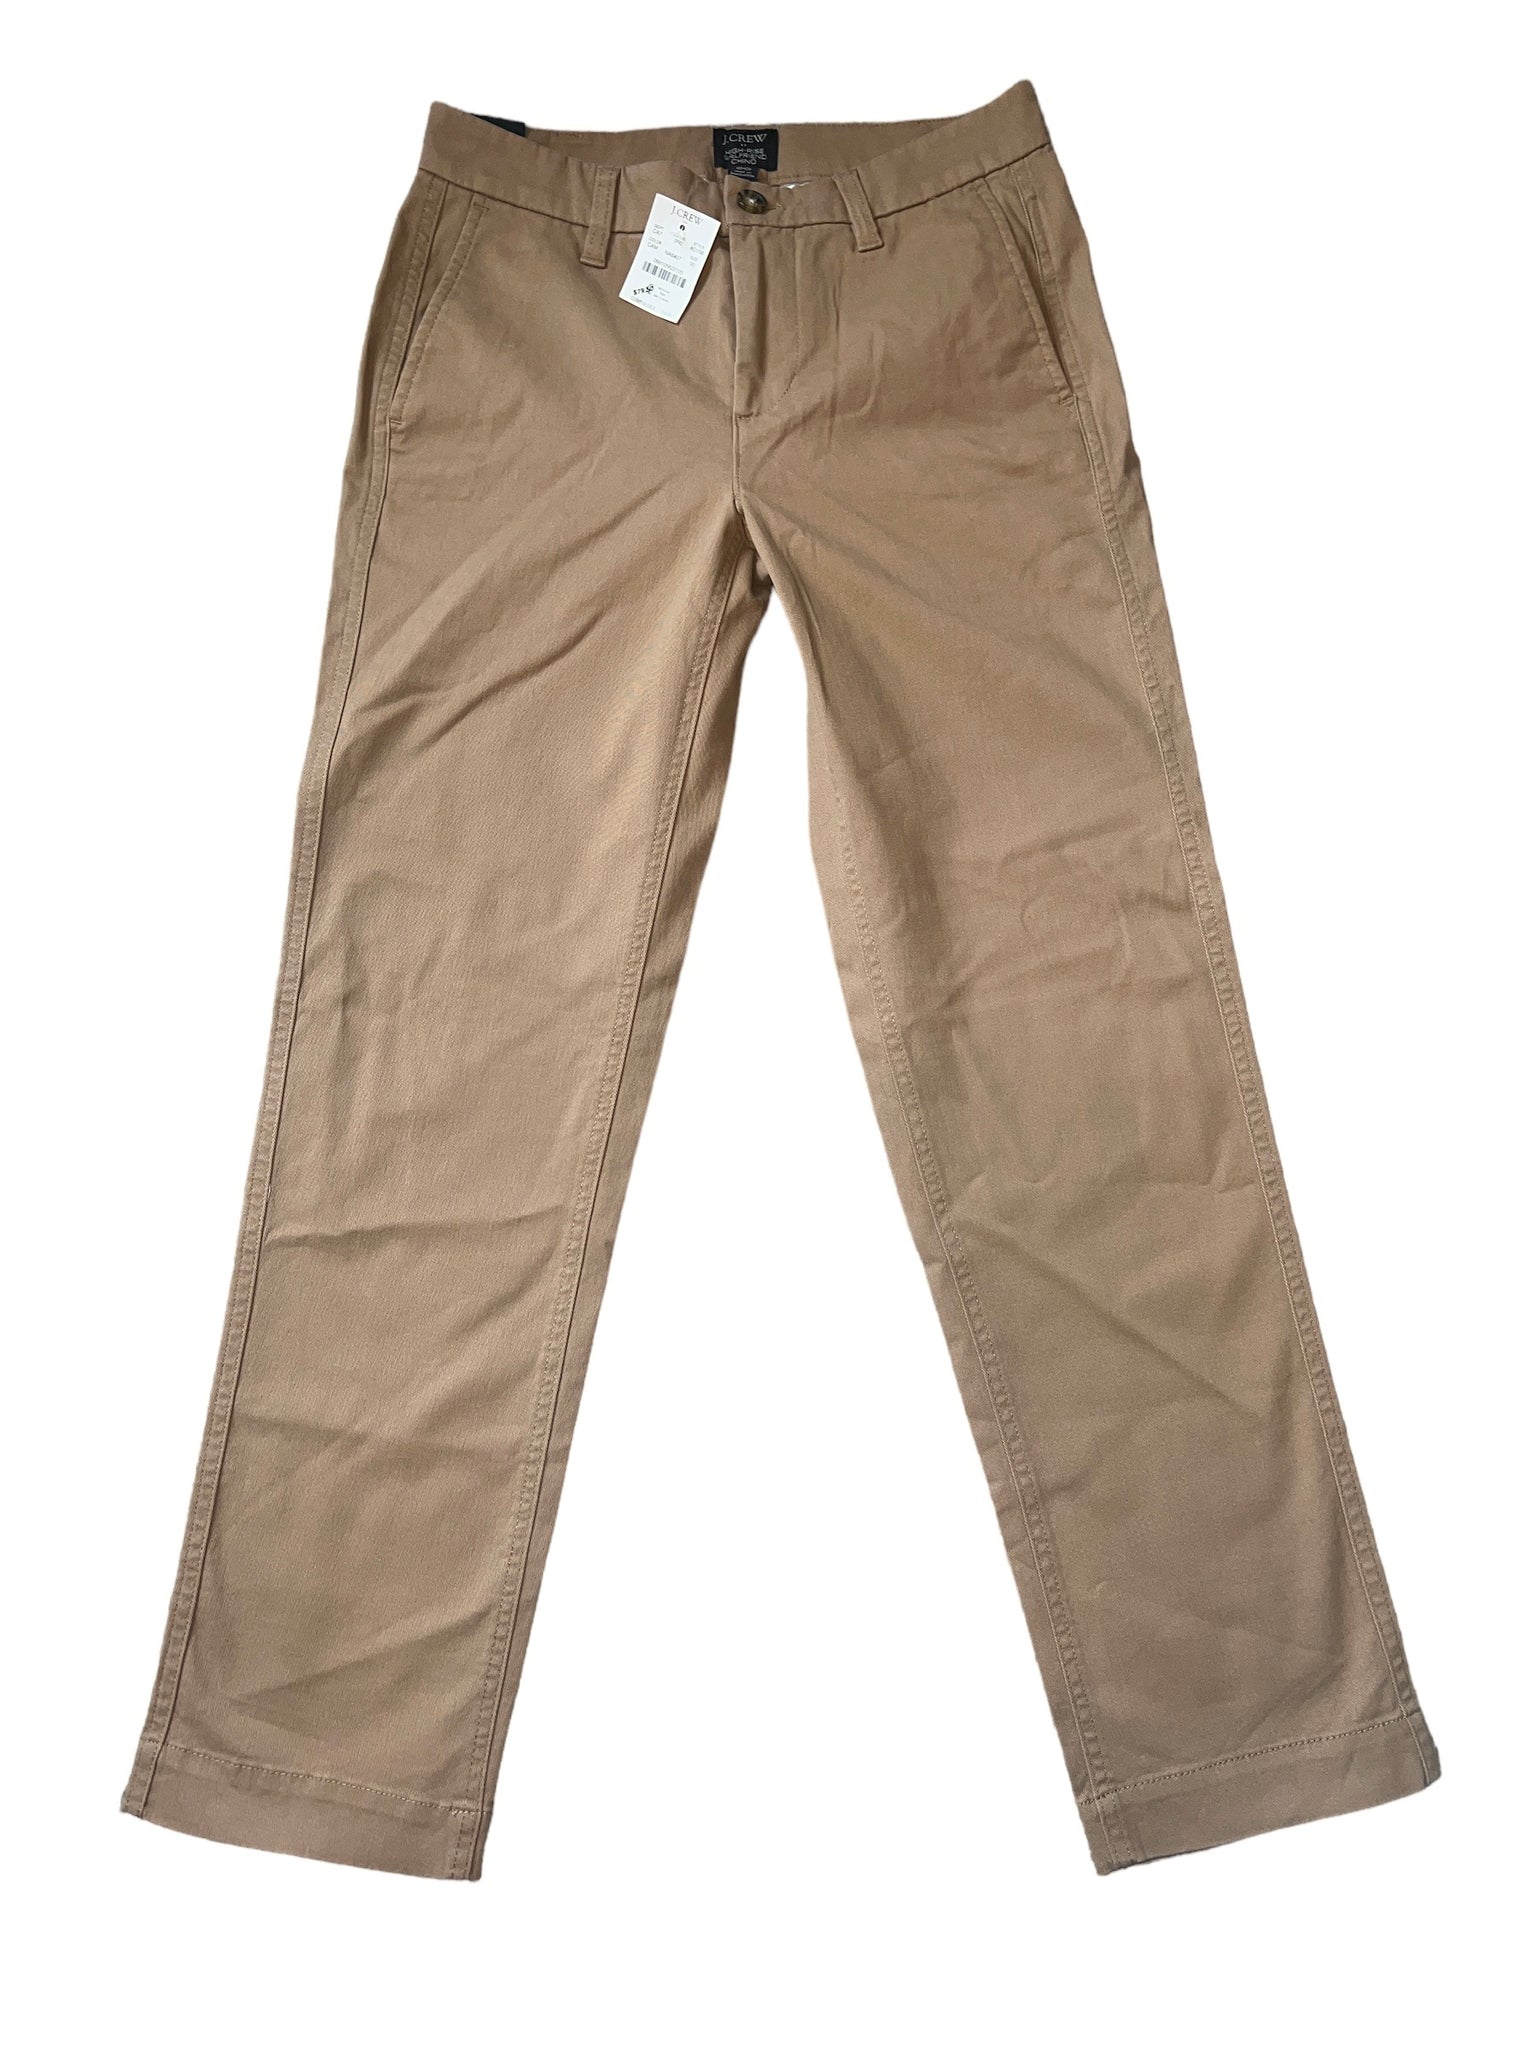 J Crew women's high-rise girlfriend chino pants in camel size 00 NEW –  Makenna's Threads